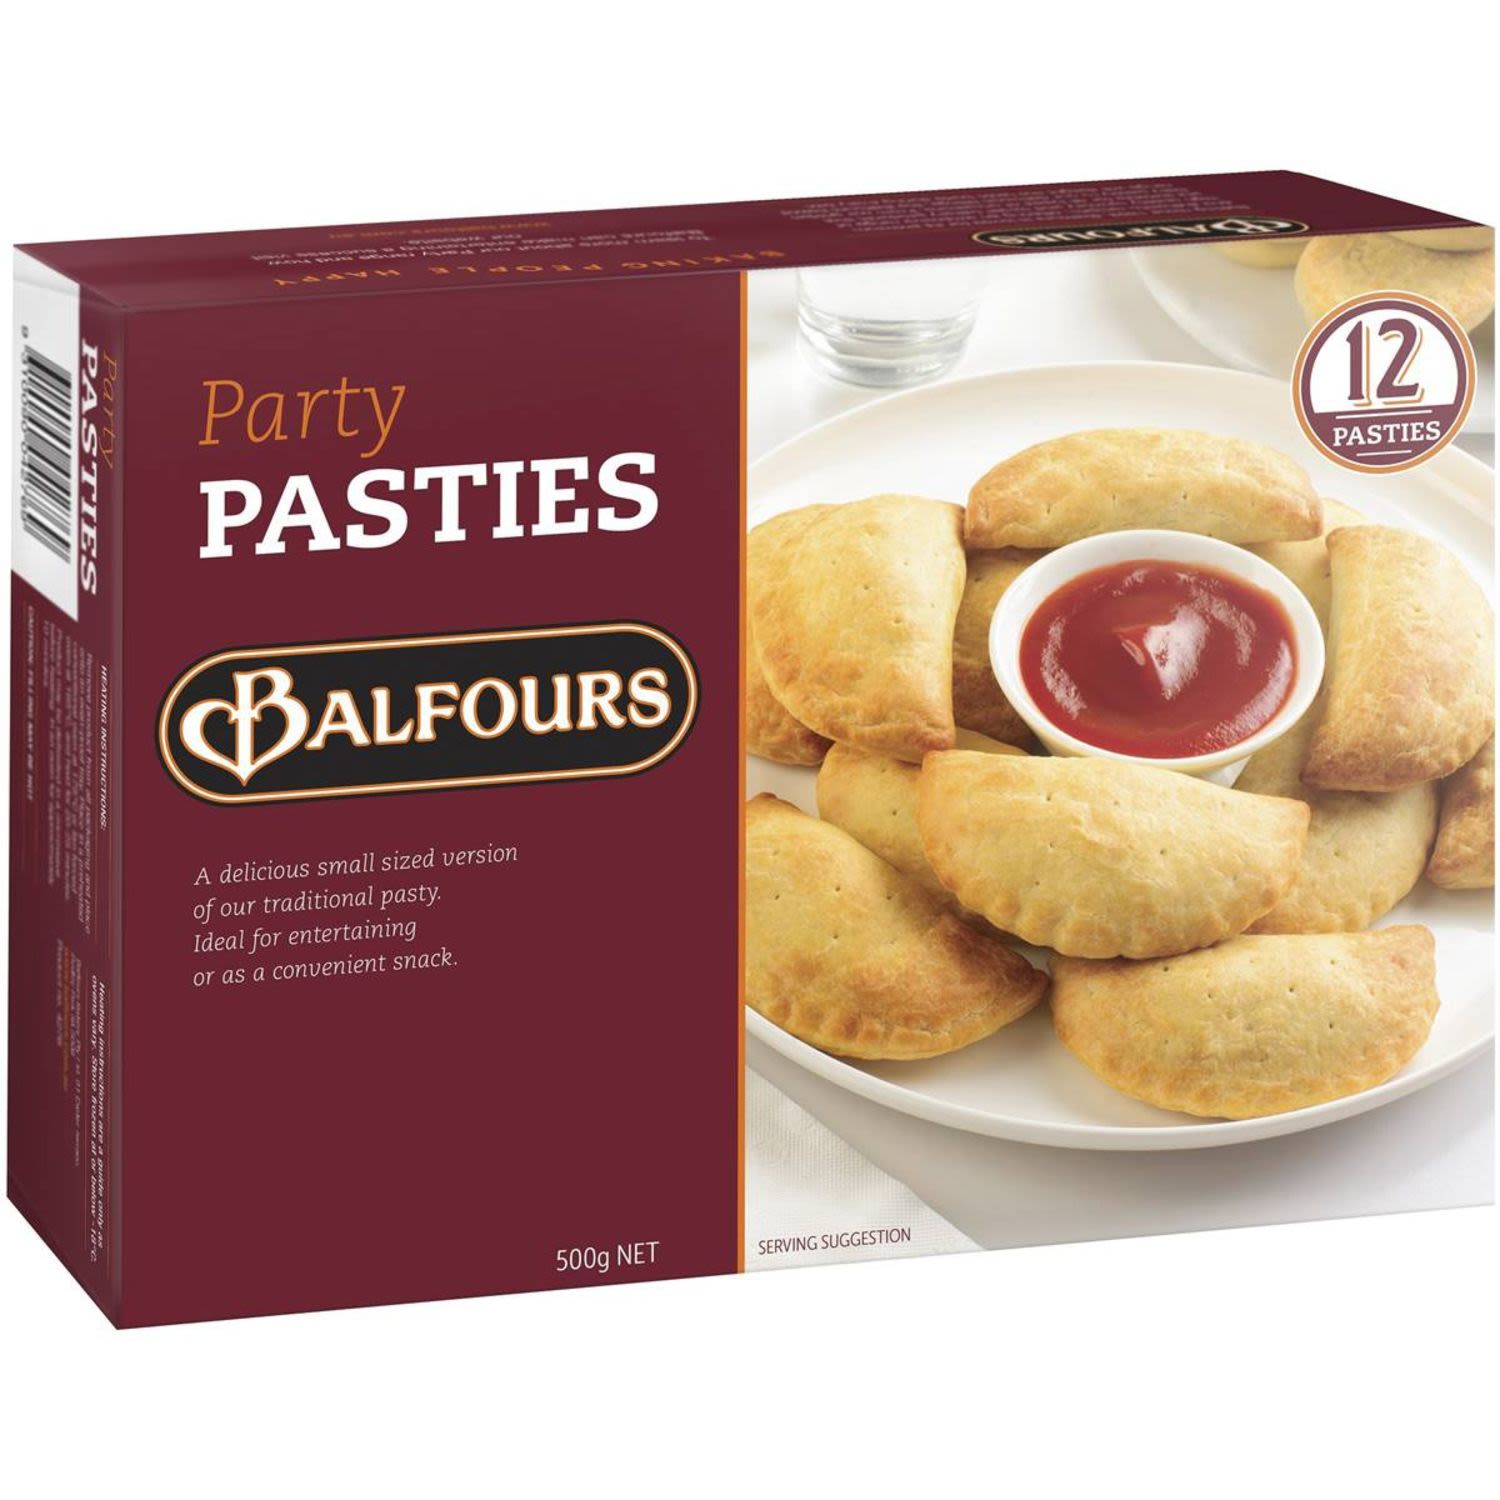 Balfours Party Pasties, 12 Each